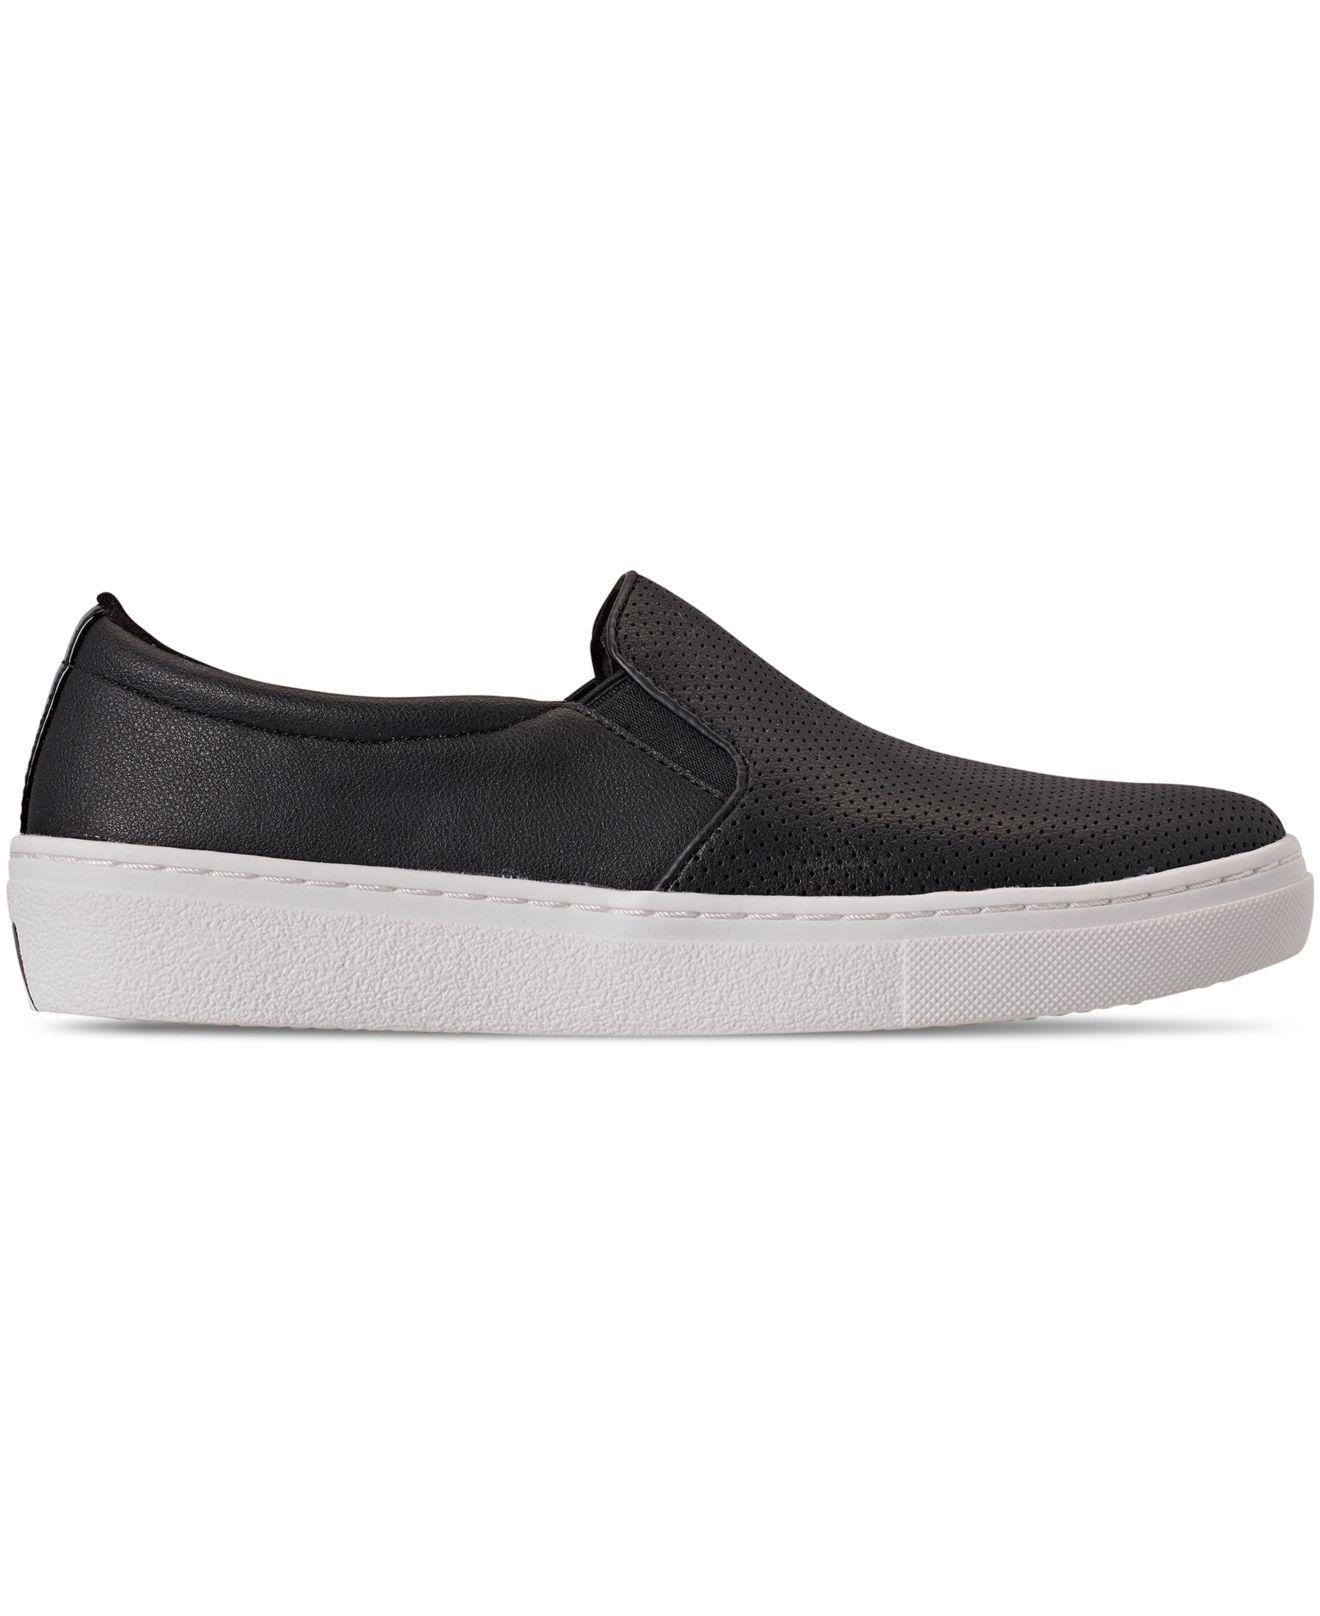 Skechers Leather Goldie - Plain Jane Slip-on Casual Sneakers From Finish  Line in Black - Lyst